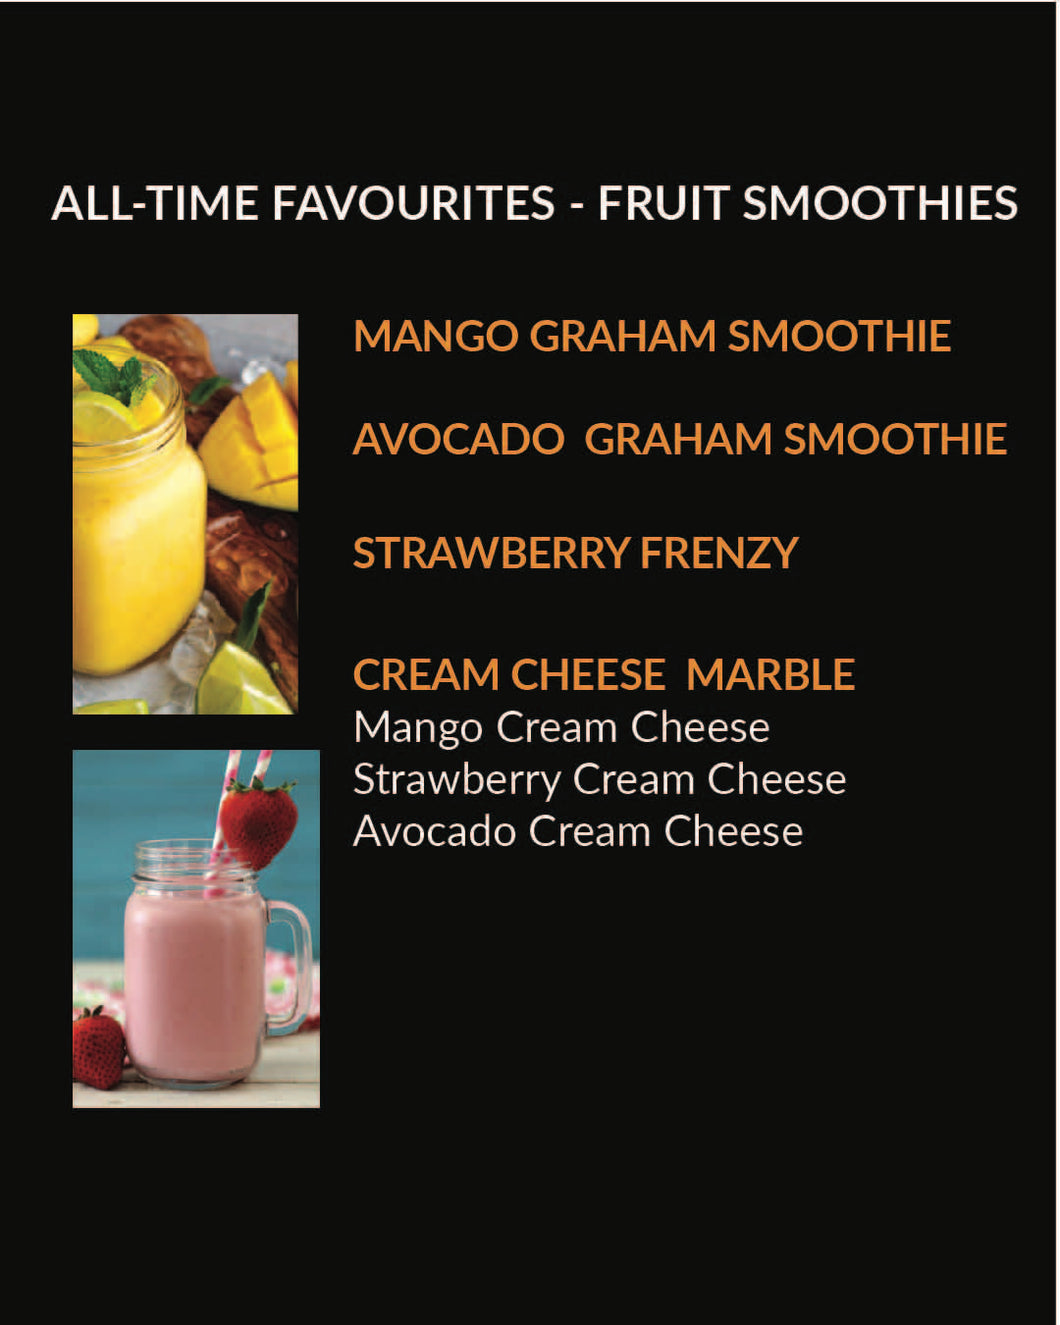 Fruit Smoothies (MENU ITEM NOT FOR SALE)